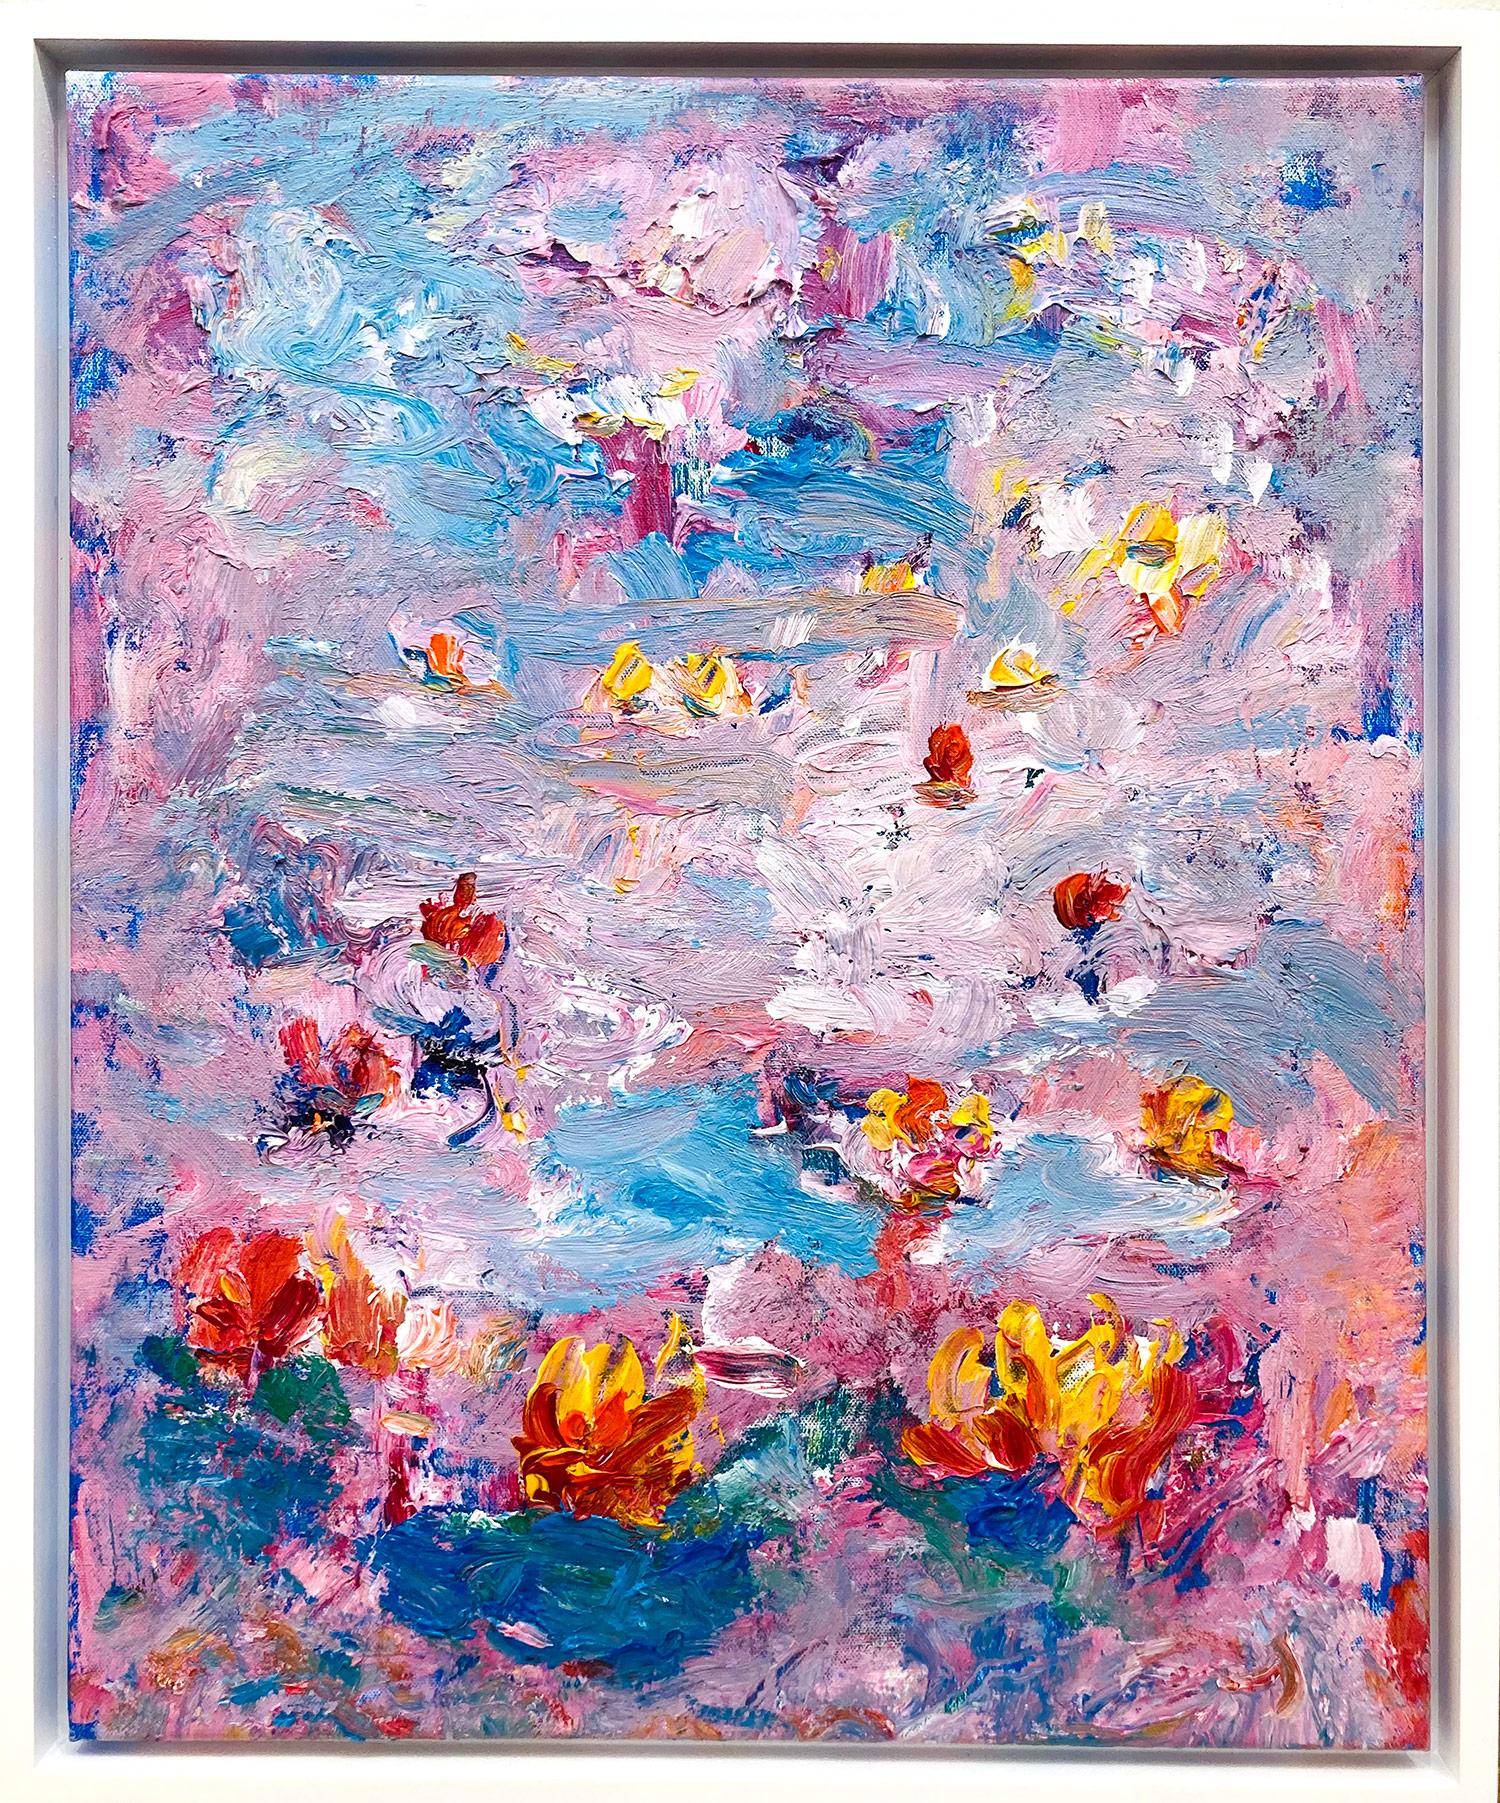 Robert Gregory Phillips Abstract Painting - "Botanical Garden 1" Contemporary Acrylic Painting in the style of Claude Monet